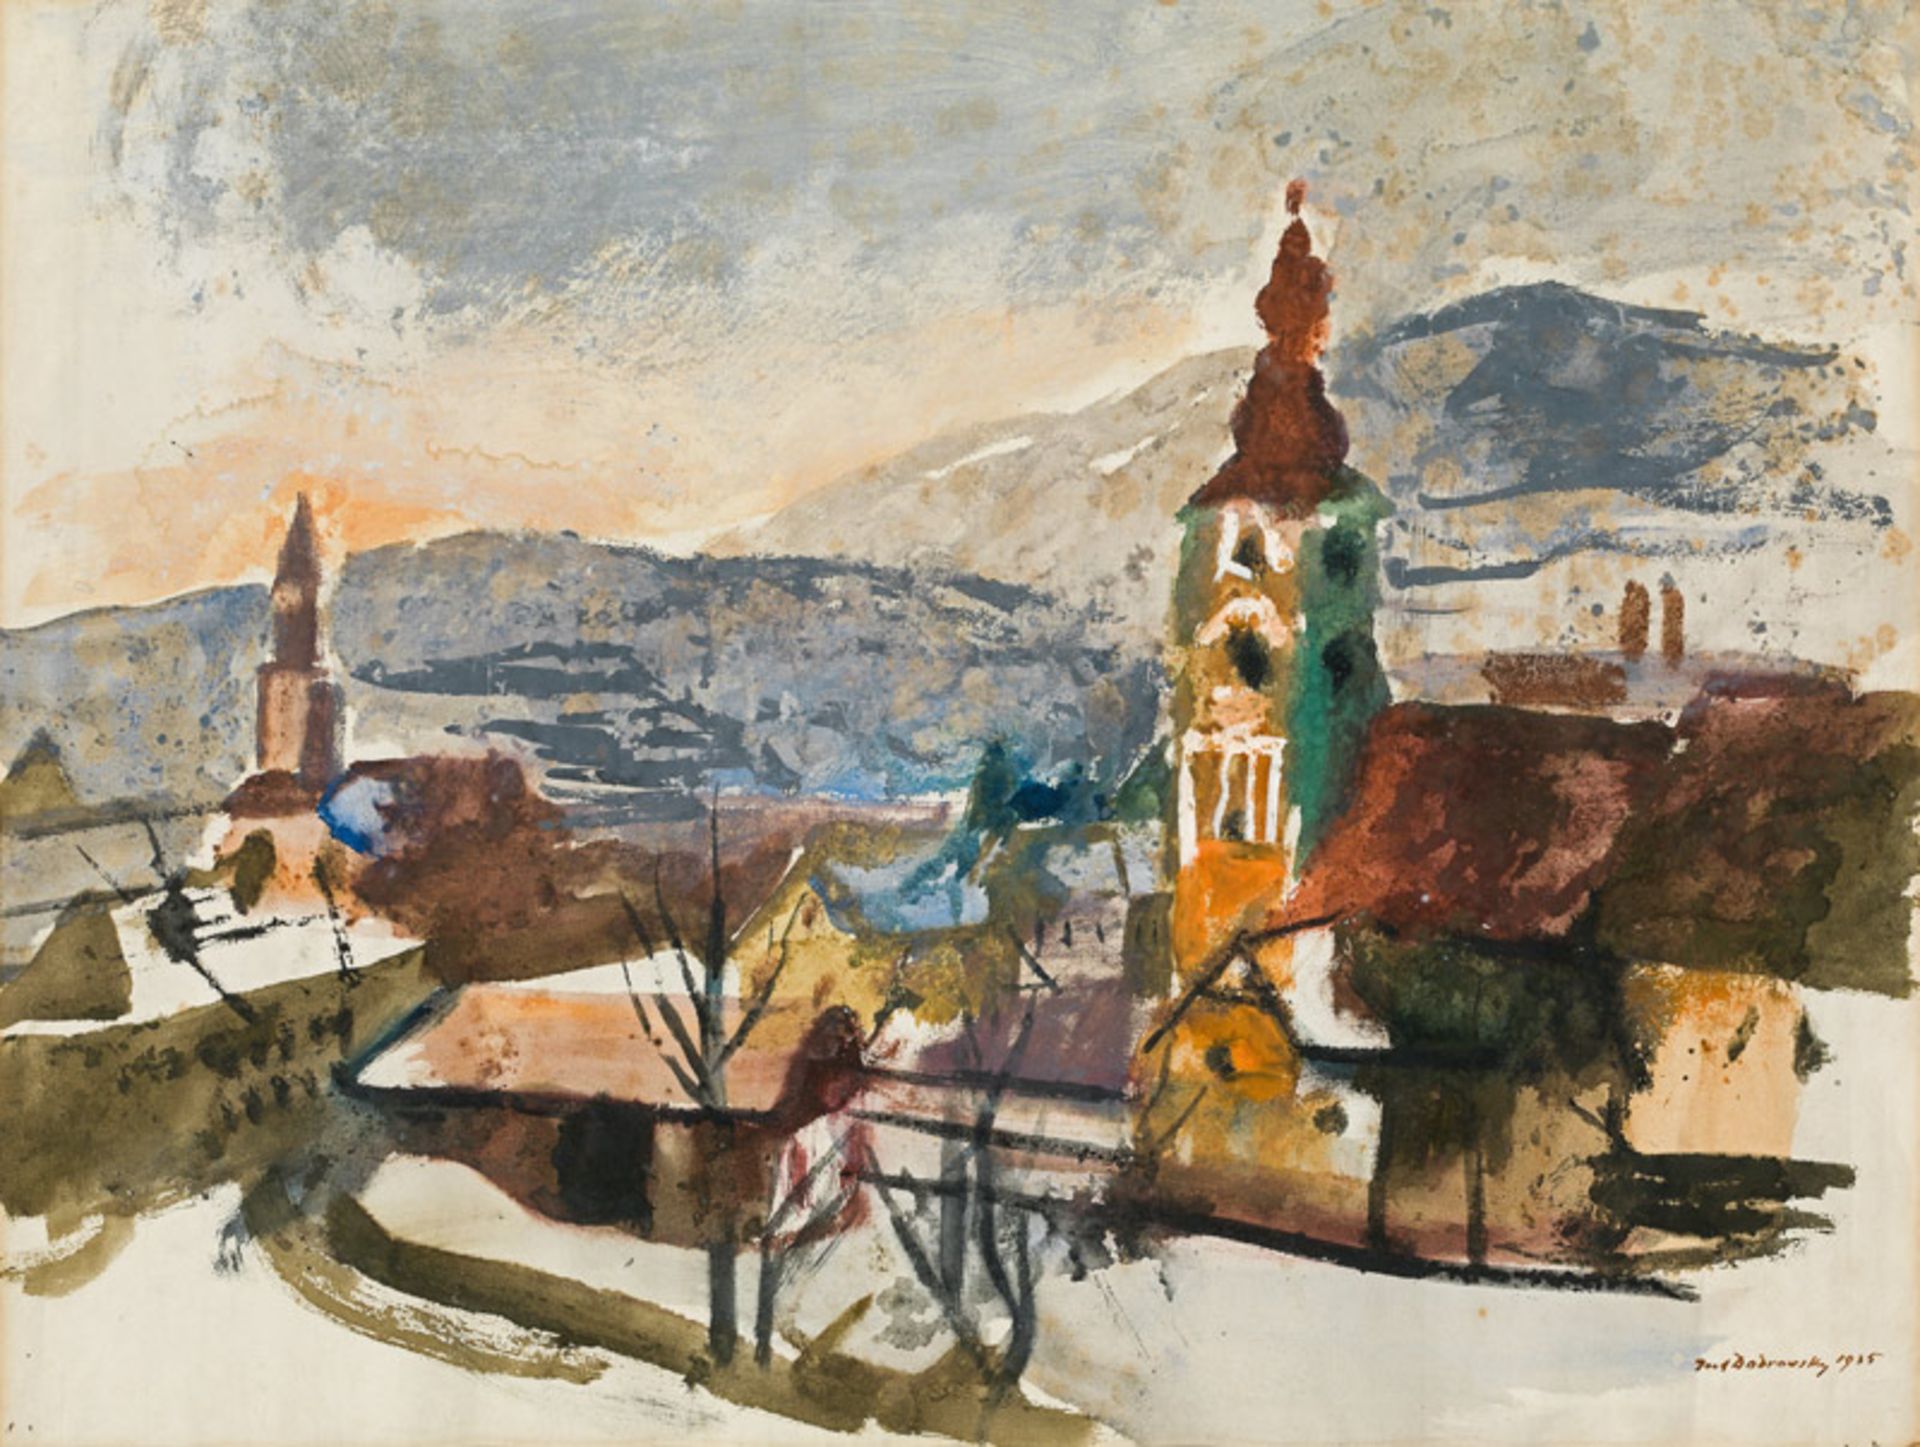 Josef Dobrowsky* Village view with church, 1935